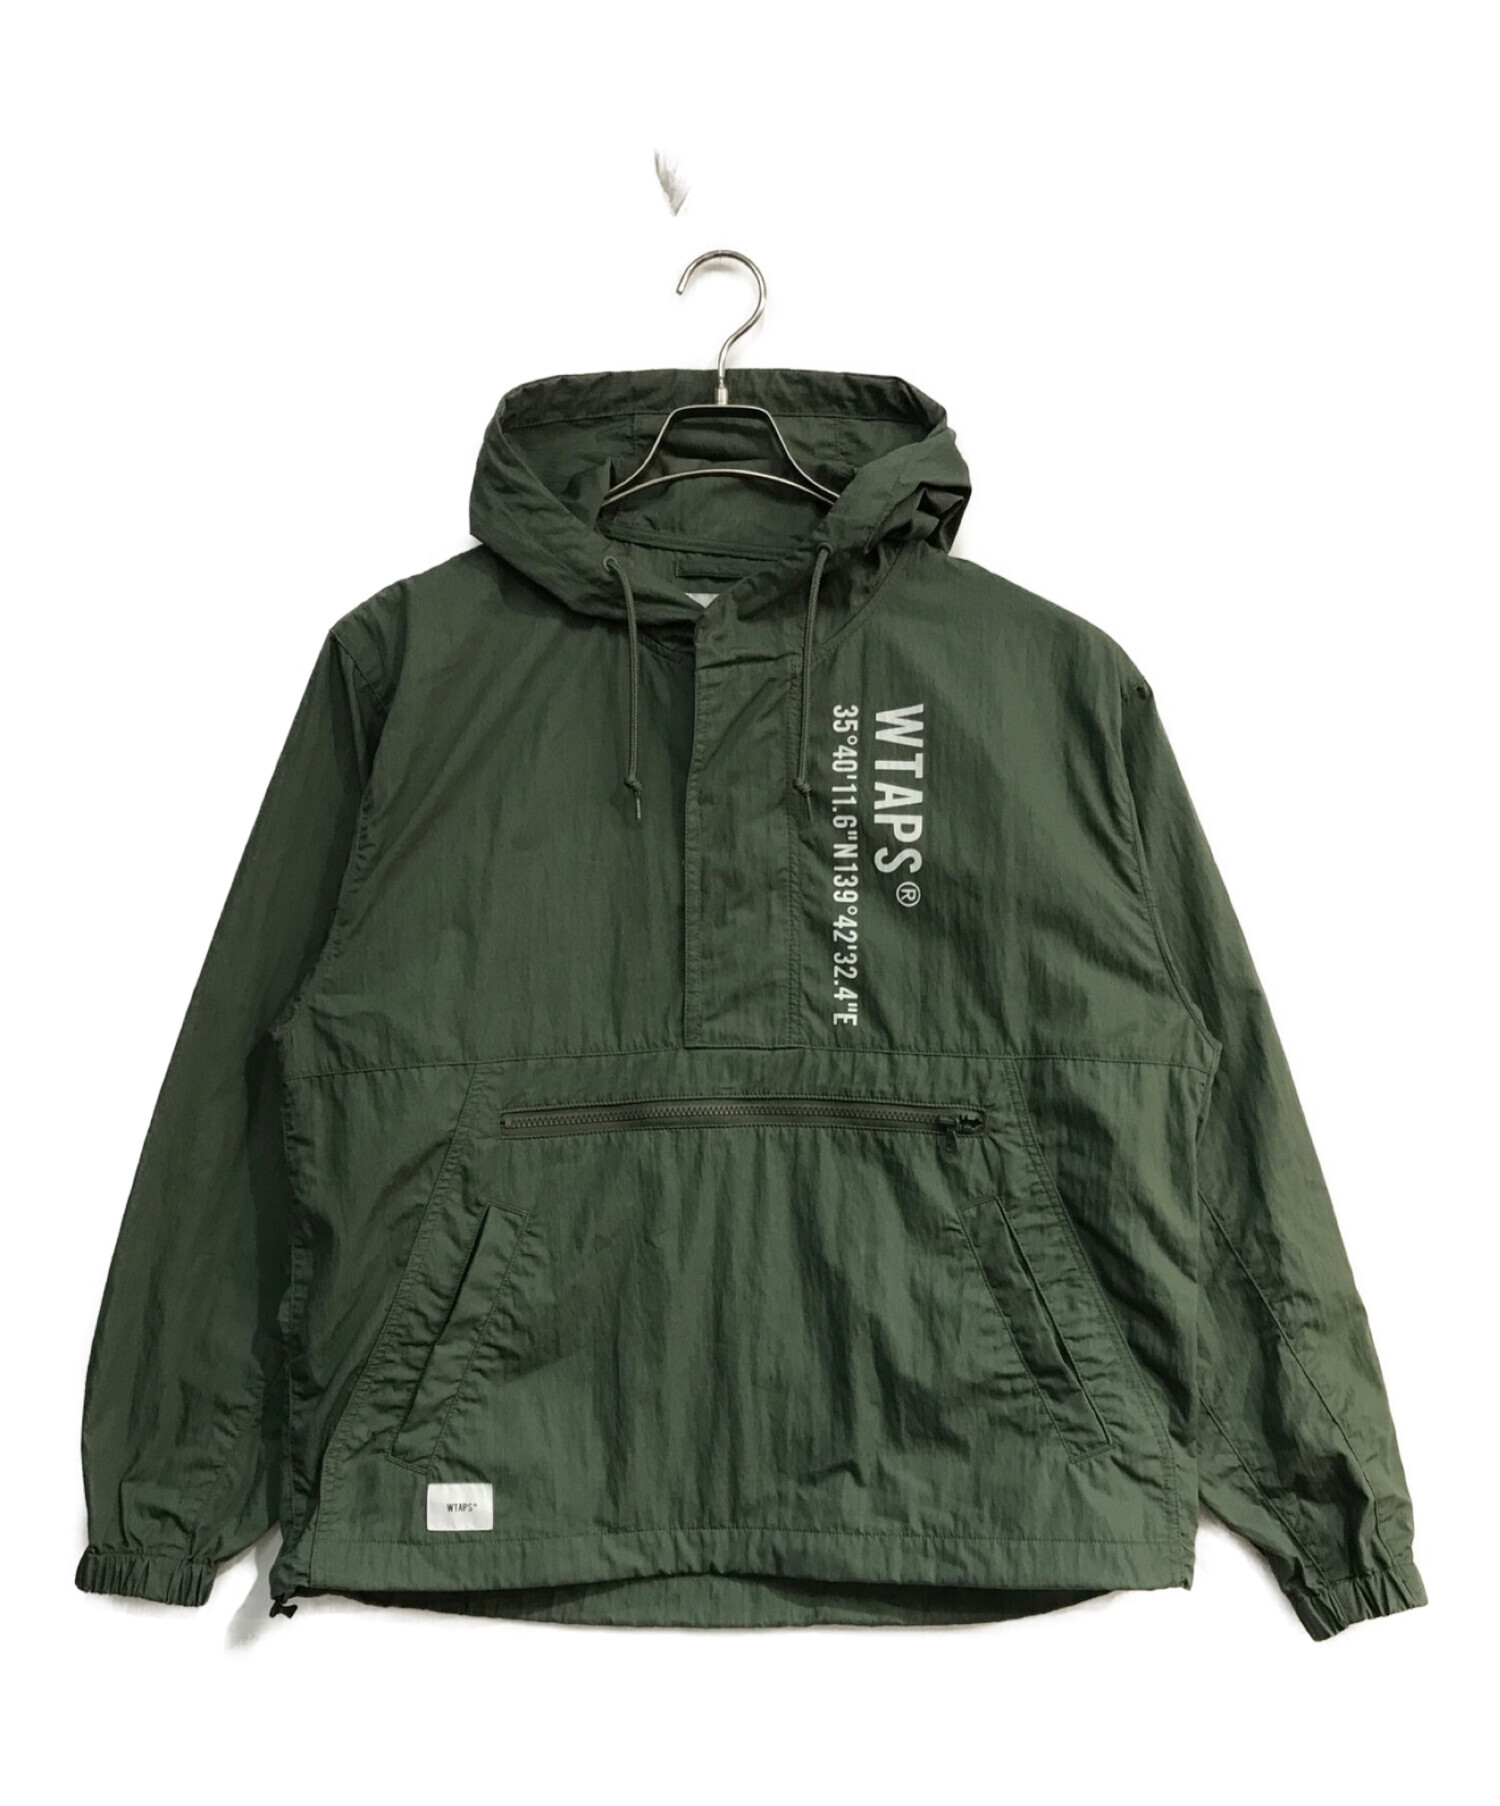 WTAPS 22ss SBS JACKET NYCO. WEATHER 黒 M